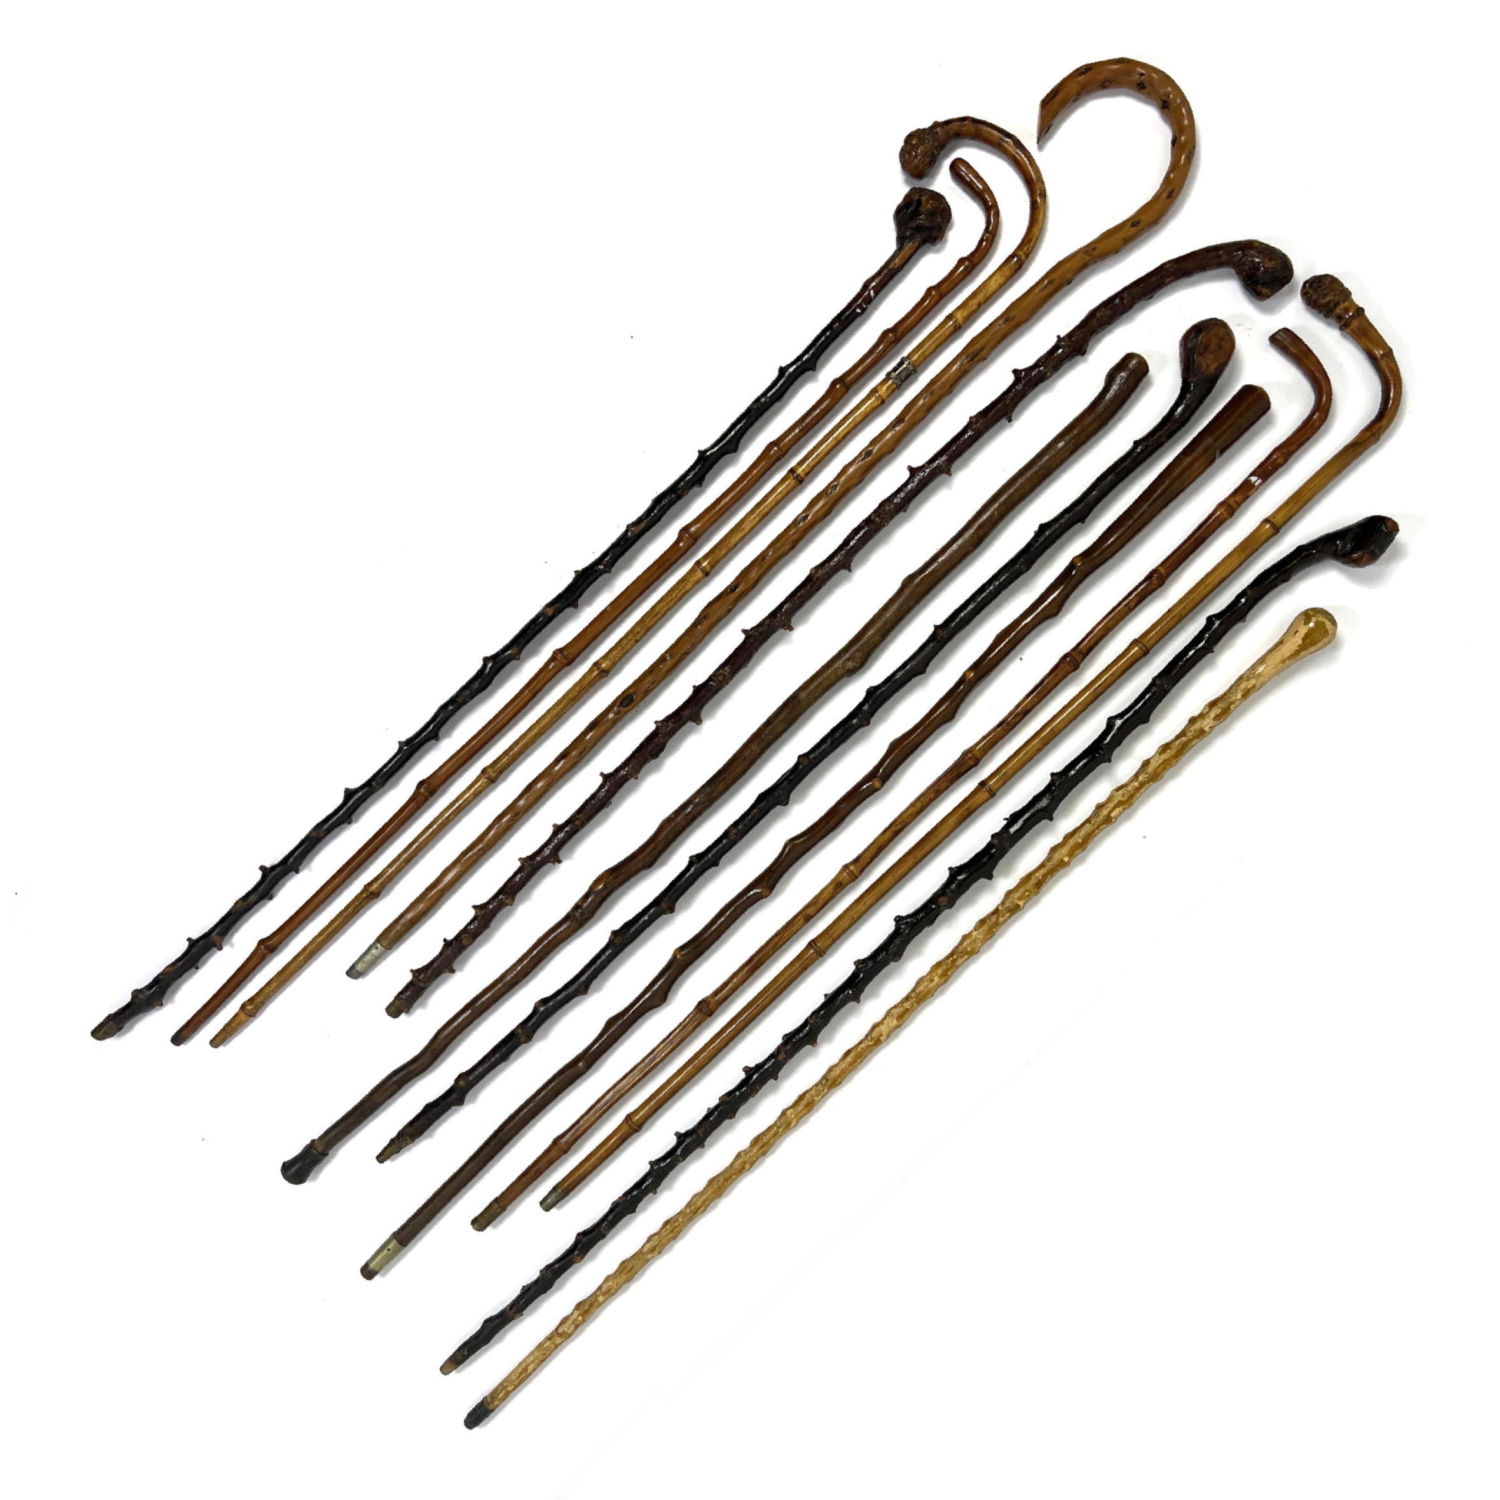 12pcs Vintage Canes and Walking